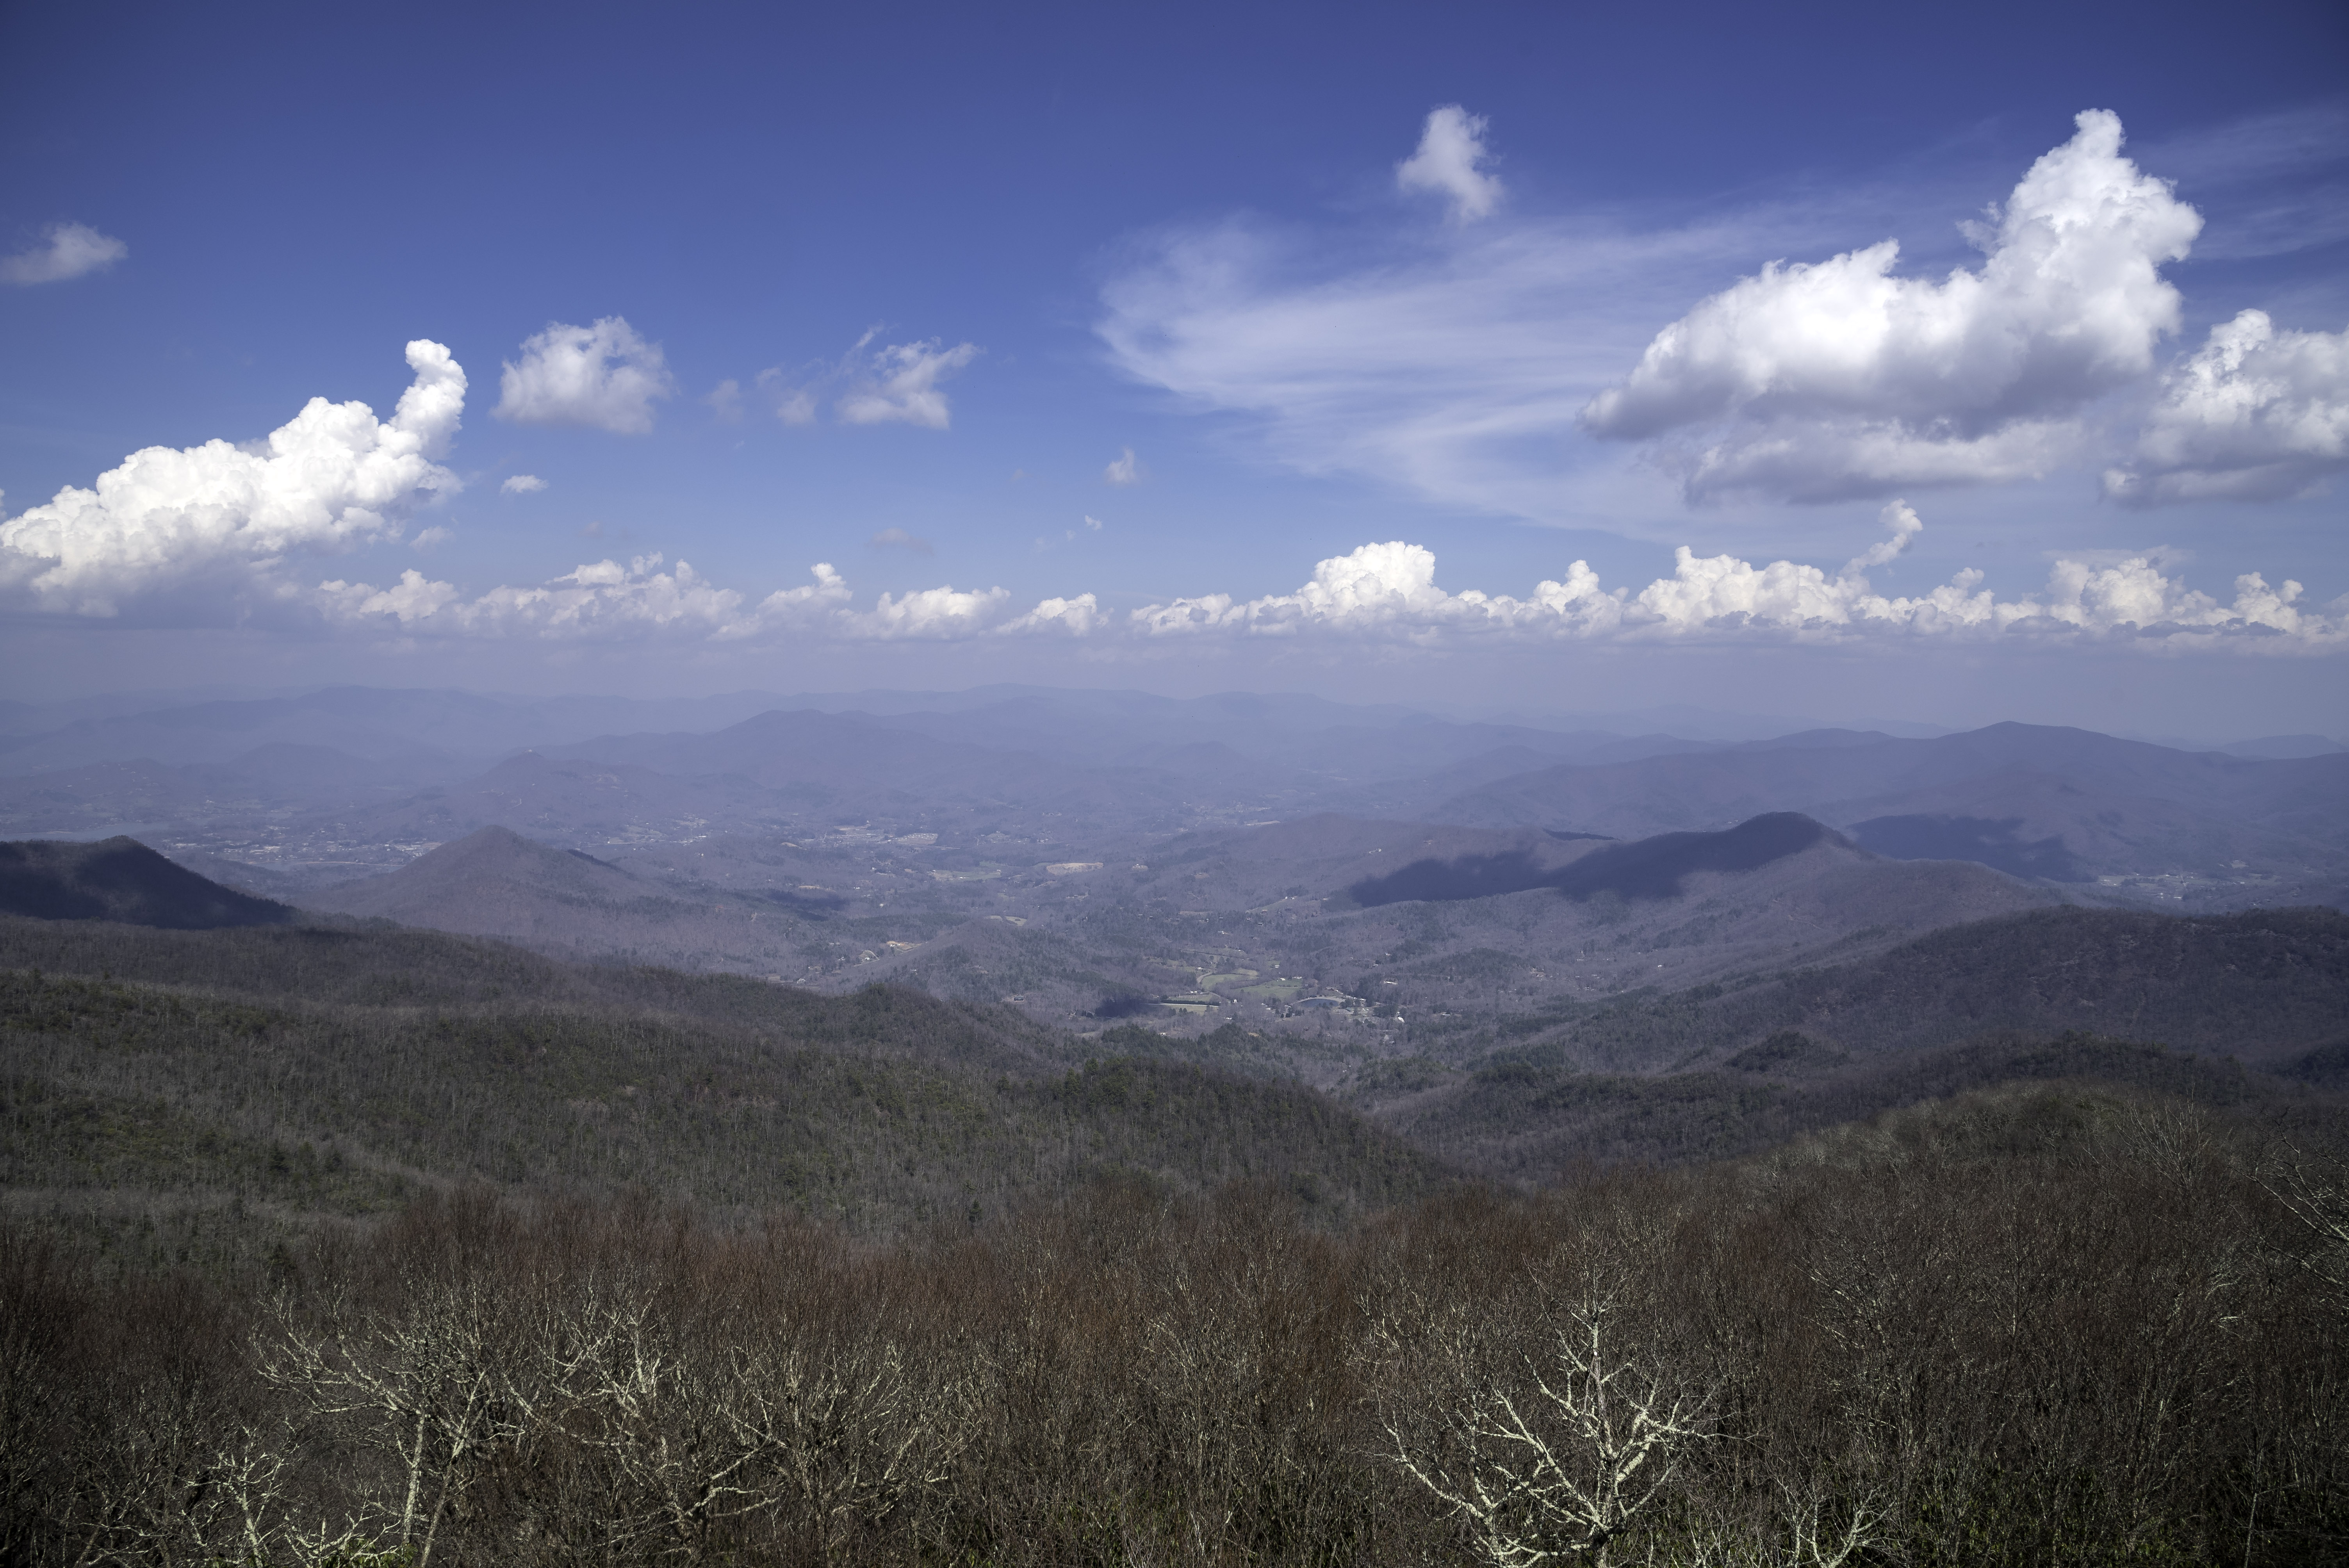 Mountains and Valley under sky and clouds from Brasstown Bald, Georgia image - Free stock photo ...